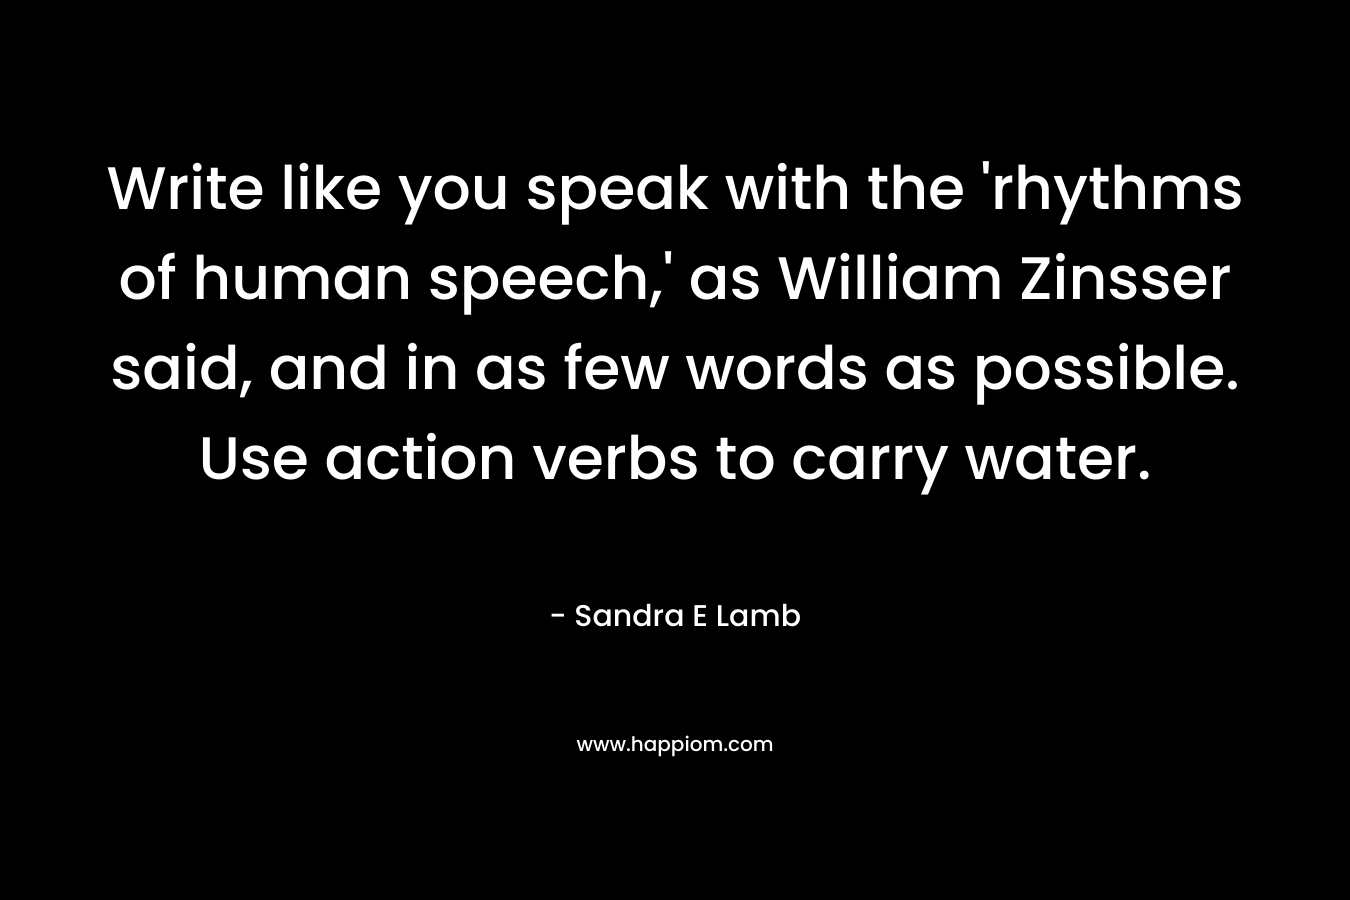 Write like you speak with the ‘rhythms of human speech,’ as William Zinsser said, and in as few words as possible. Use action verbs to carry water. – Sandra E Lamb